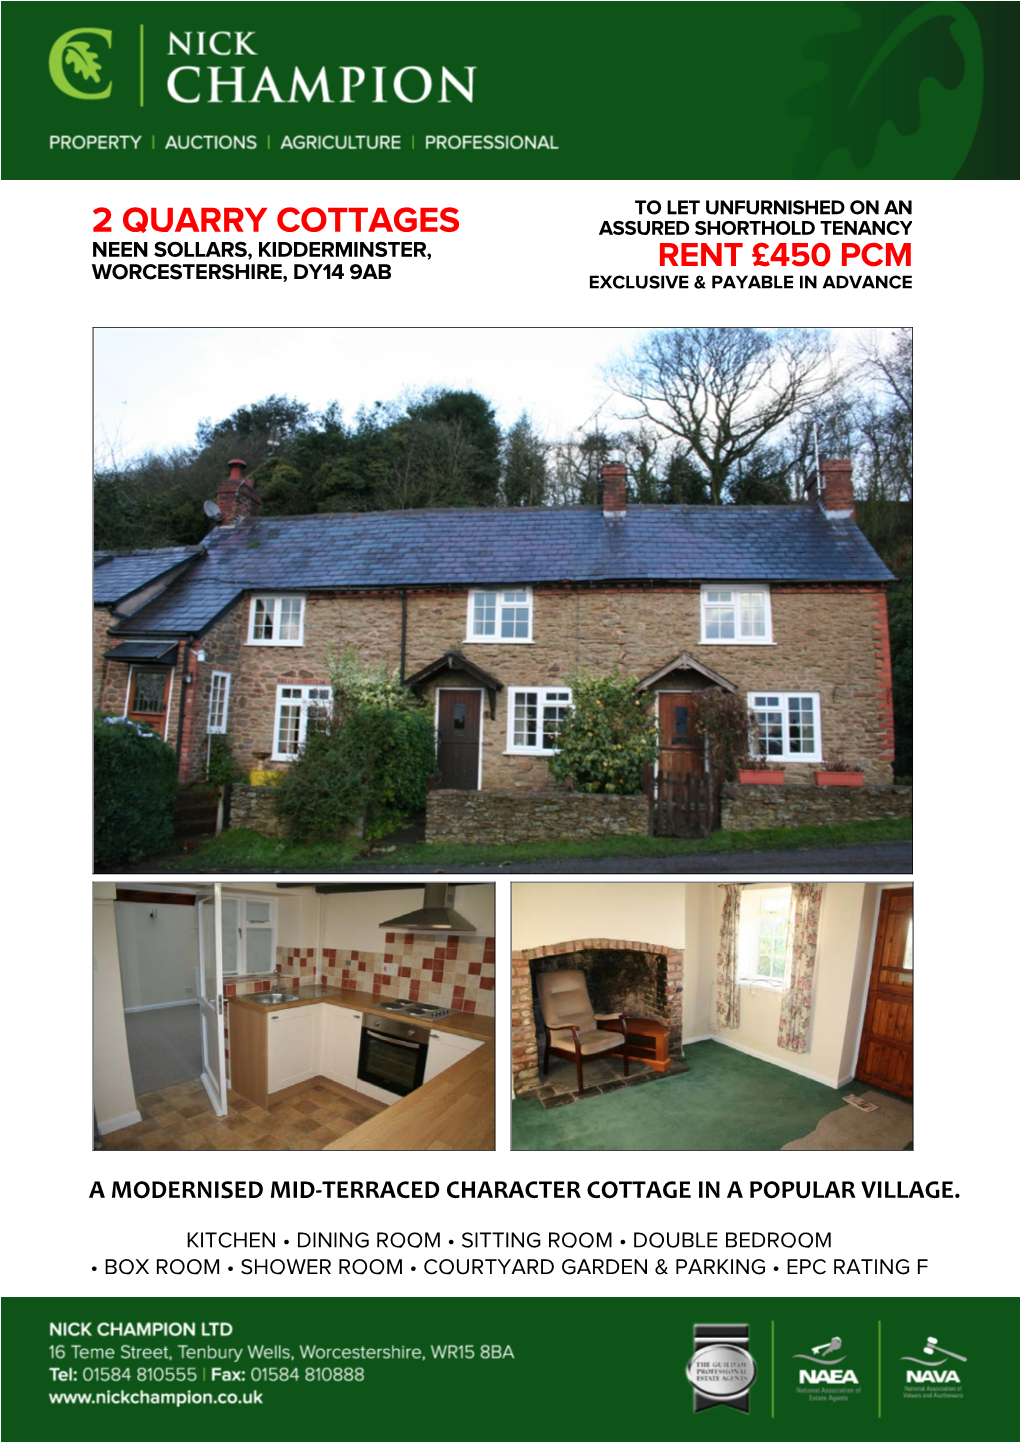 2 Quarry Cottages Assured Shorthold Tenancy Neen Sollars, Kidderminster, Rent £450 Pcm Worcestershire, Dy14 9Ab Exclusive & Payable in Advance